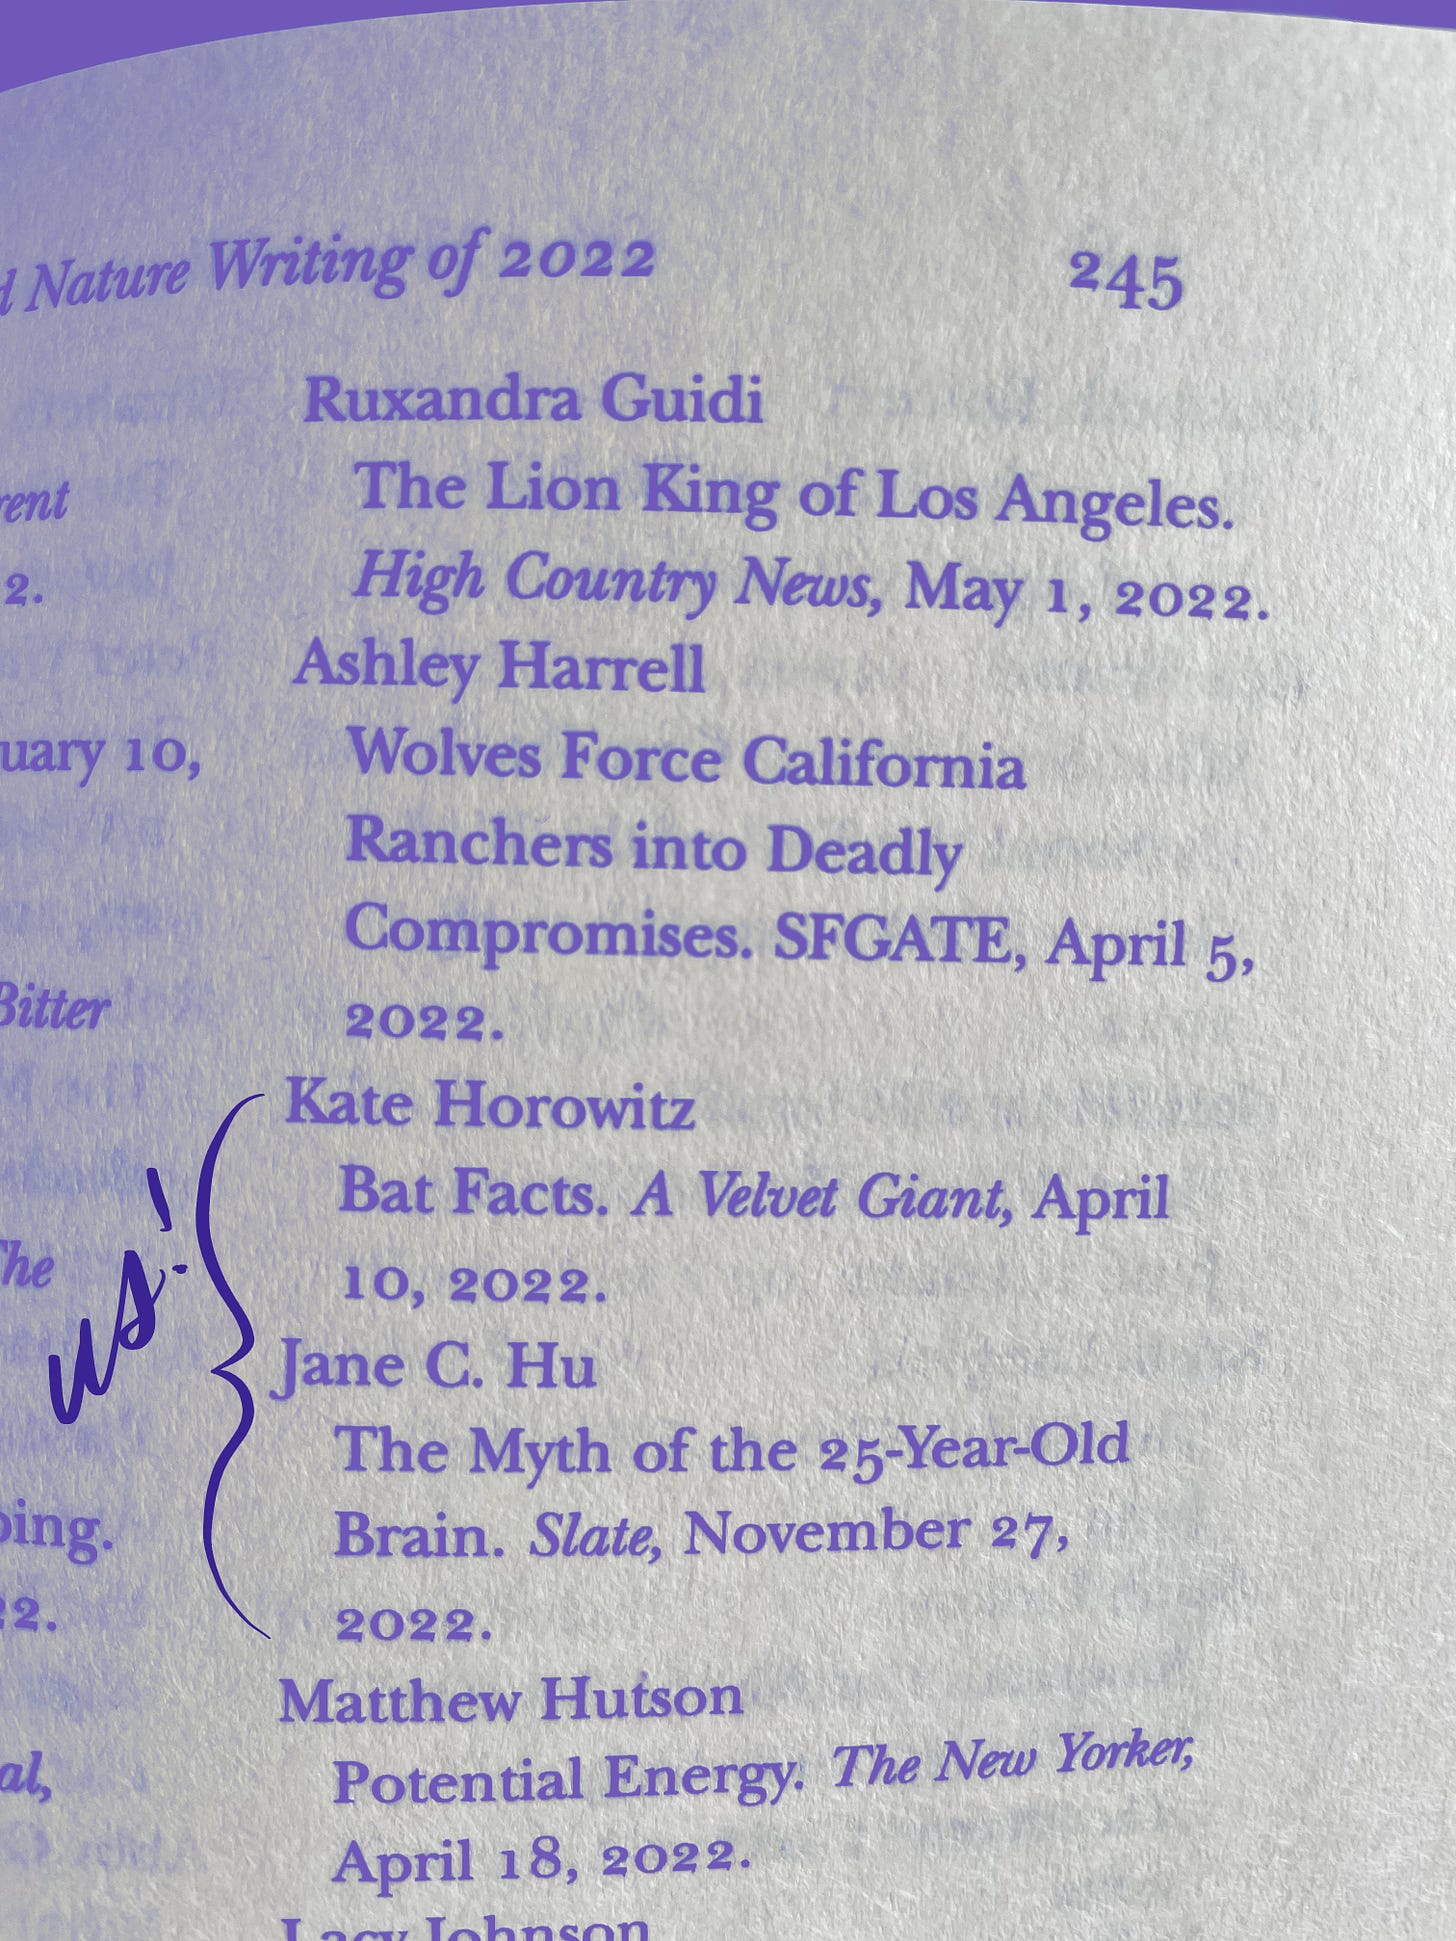 Photograph of a book’s index page listing authors, the titles of their work, the outlets in which they were published, and the date. Included in the list are two important entries: “Kate Horowitz / Bat Facts. A Velvet Giant, April 10, 2022.” and “Jane C. Hu / The Myth of the 25-Year-Old Brain. Slate, November 27, 2022.” Handwritten purple script beside the two entries says “Us!”